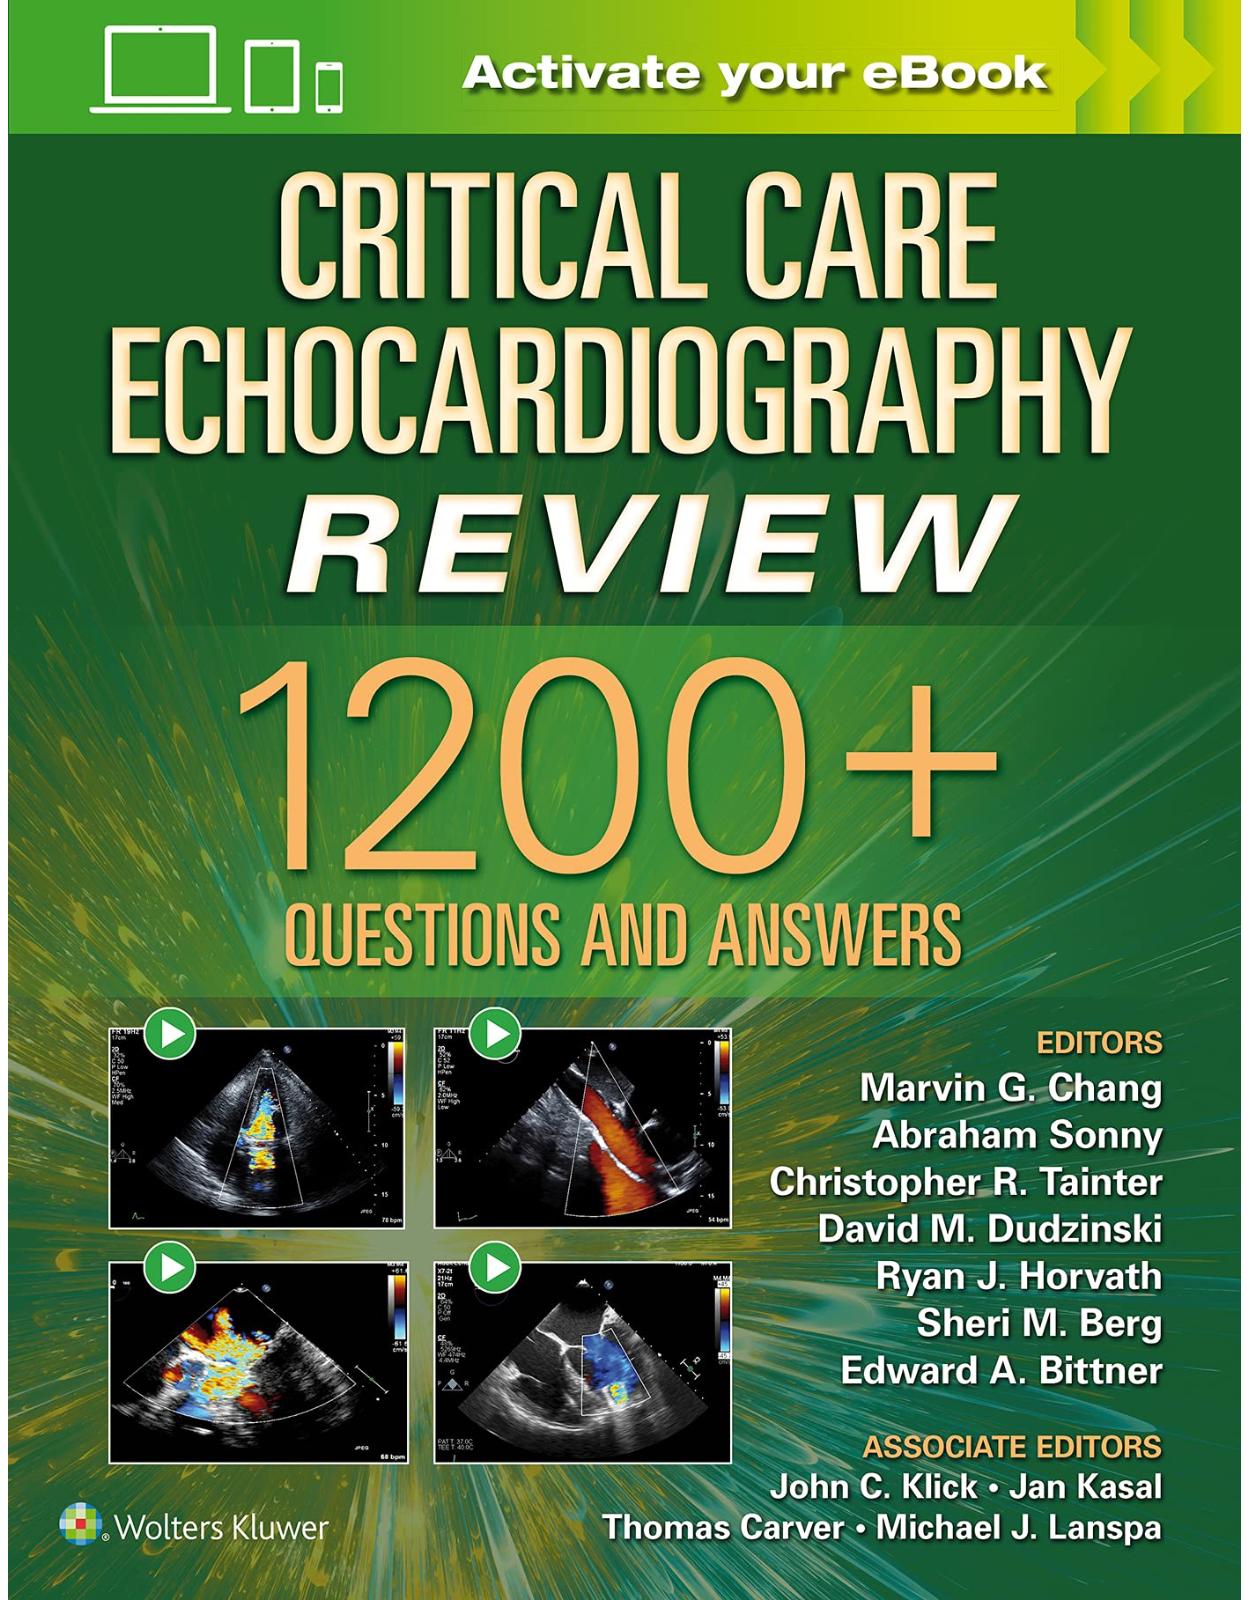 Critical Care Echocardiography Review: 1200+ Questions and Answers: Print + Digital Version with Multimedia